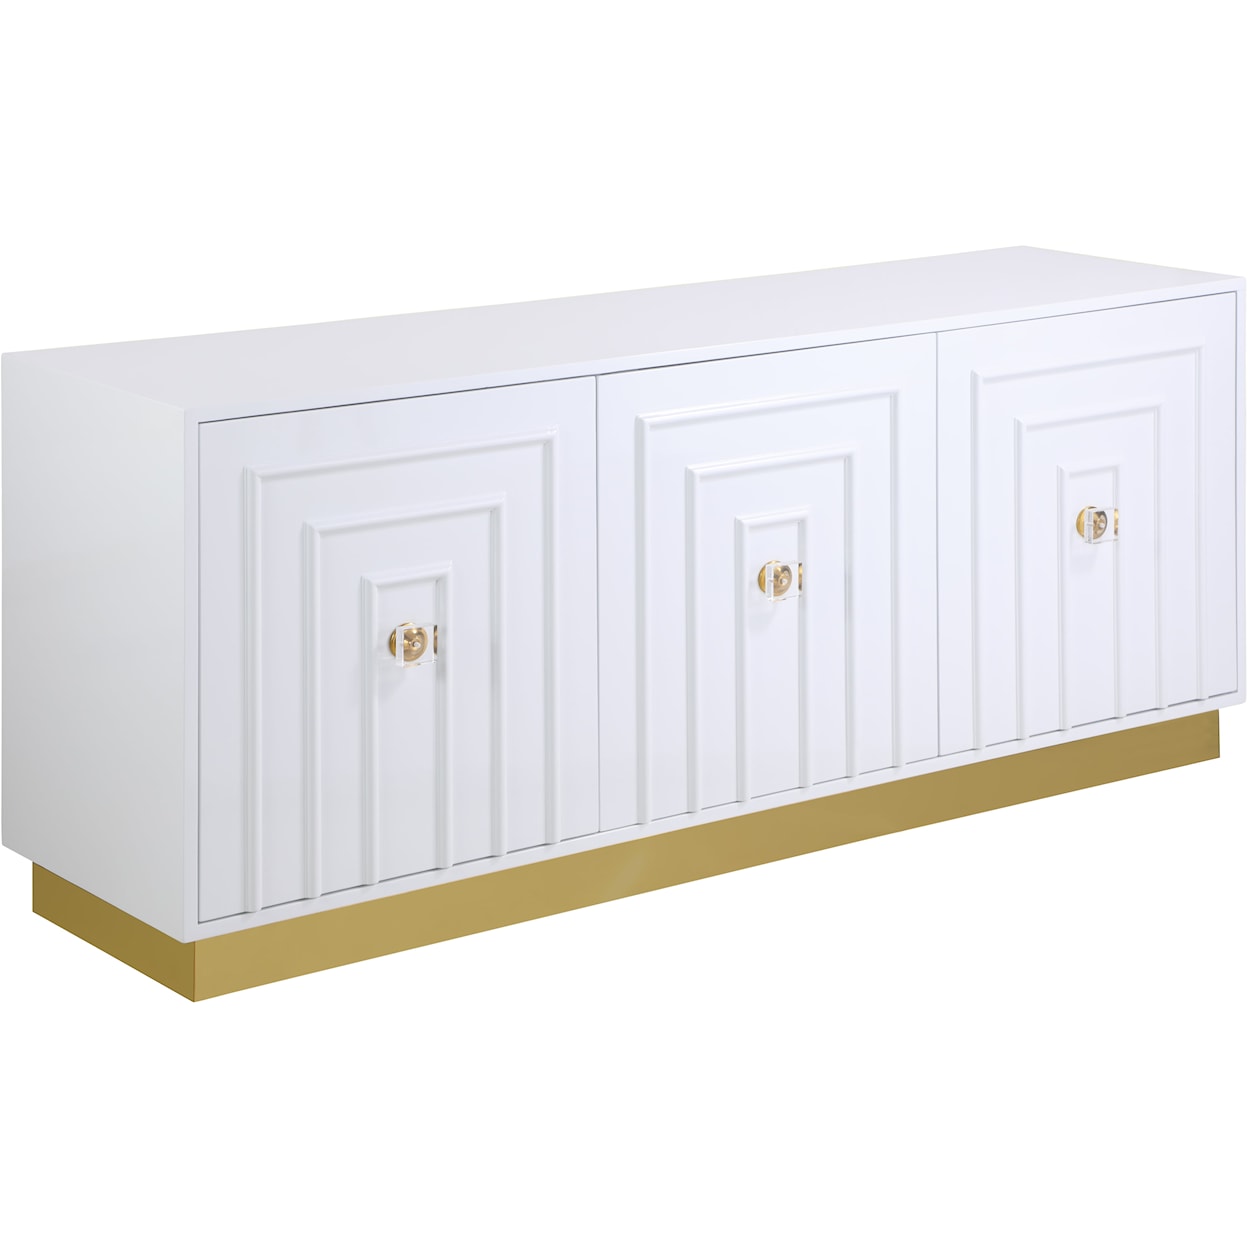 Meridian Furniture Cosmopolitan White Lacquer Sideboard with Gold Base